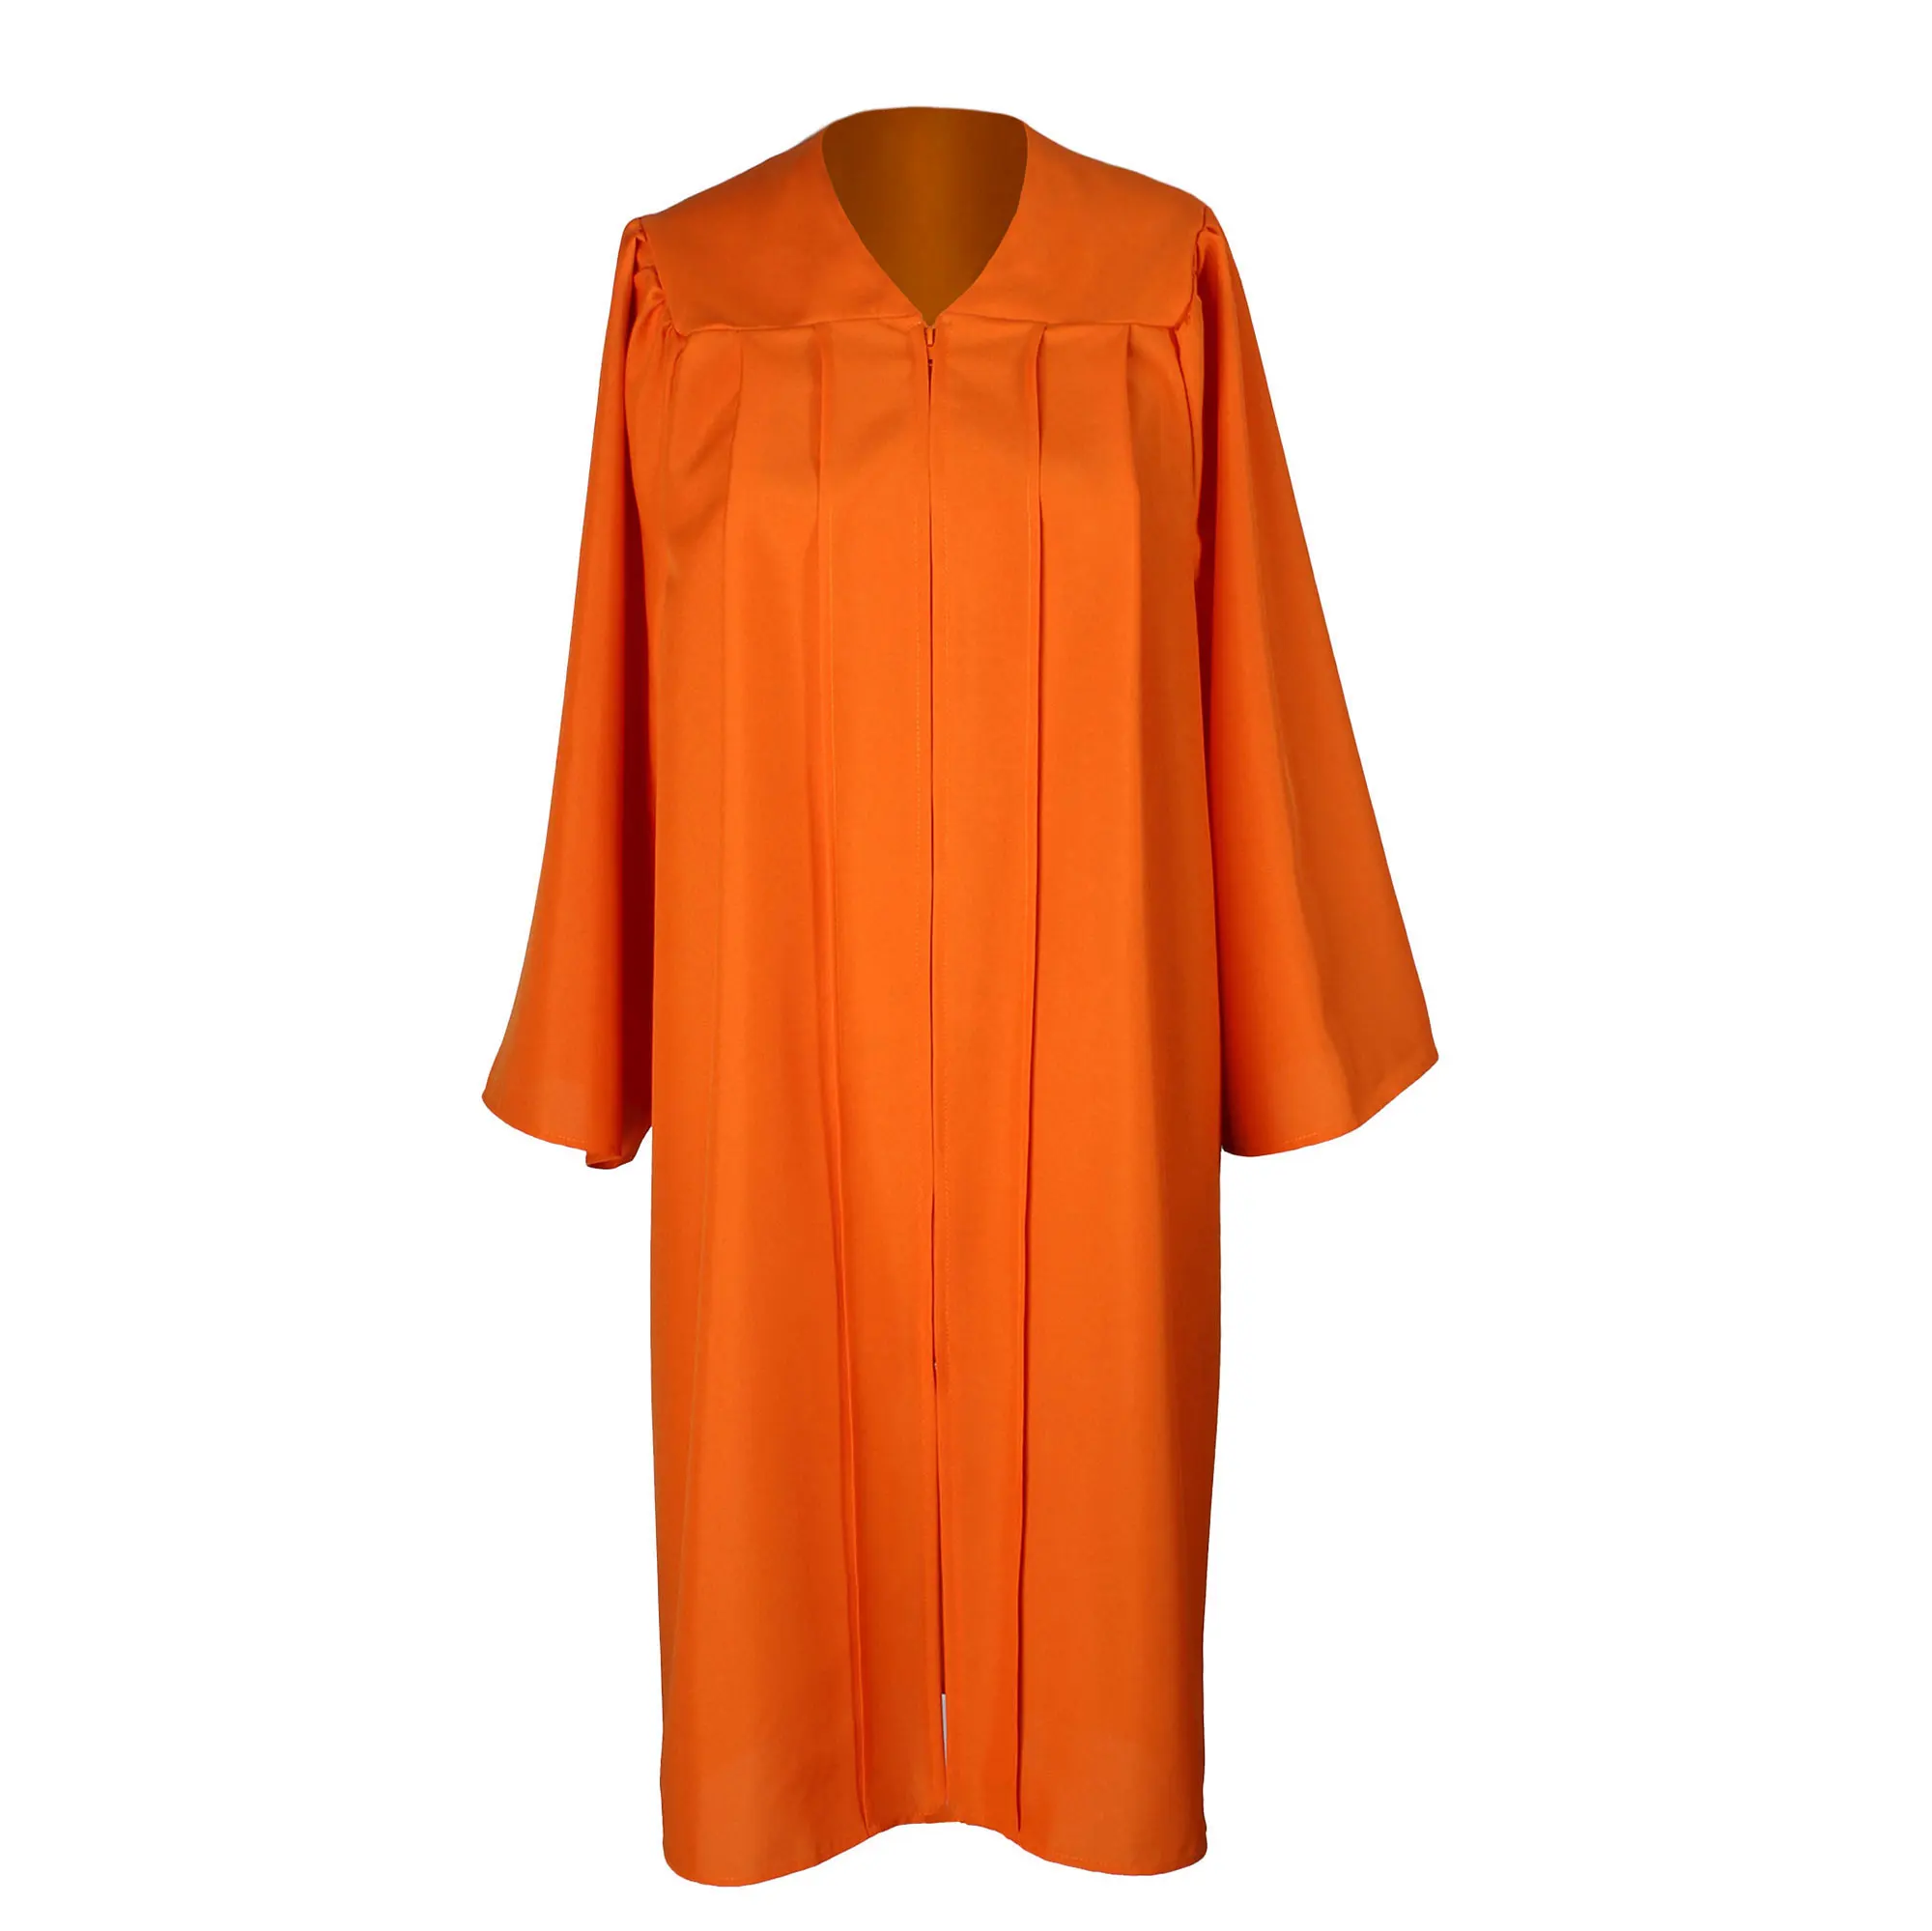 2018 Wholesale High Quality Orange Graduation Matte Cap And Gown For ...